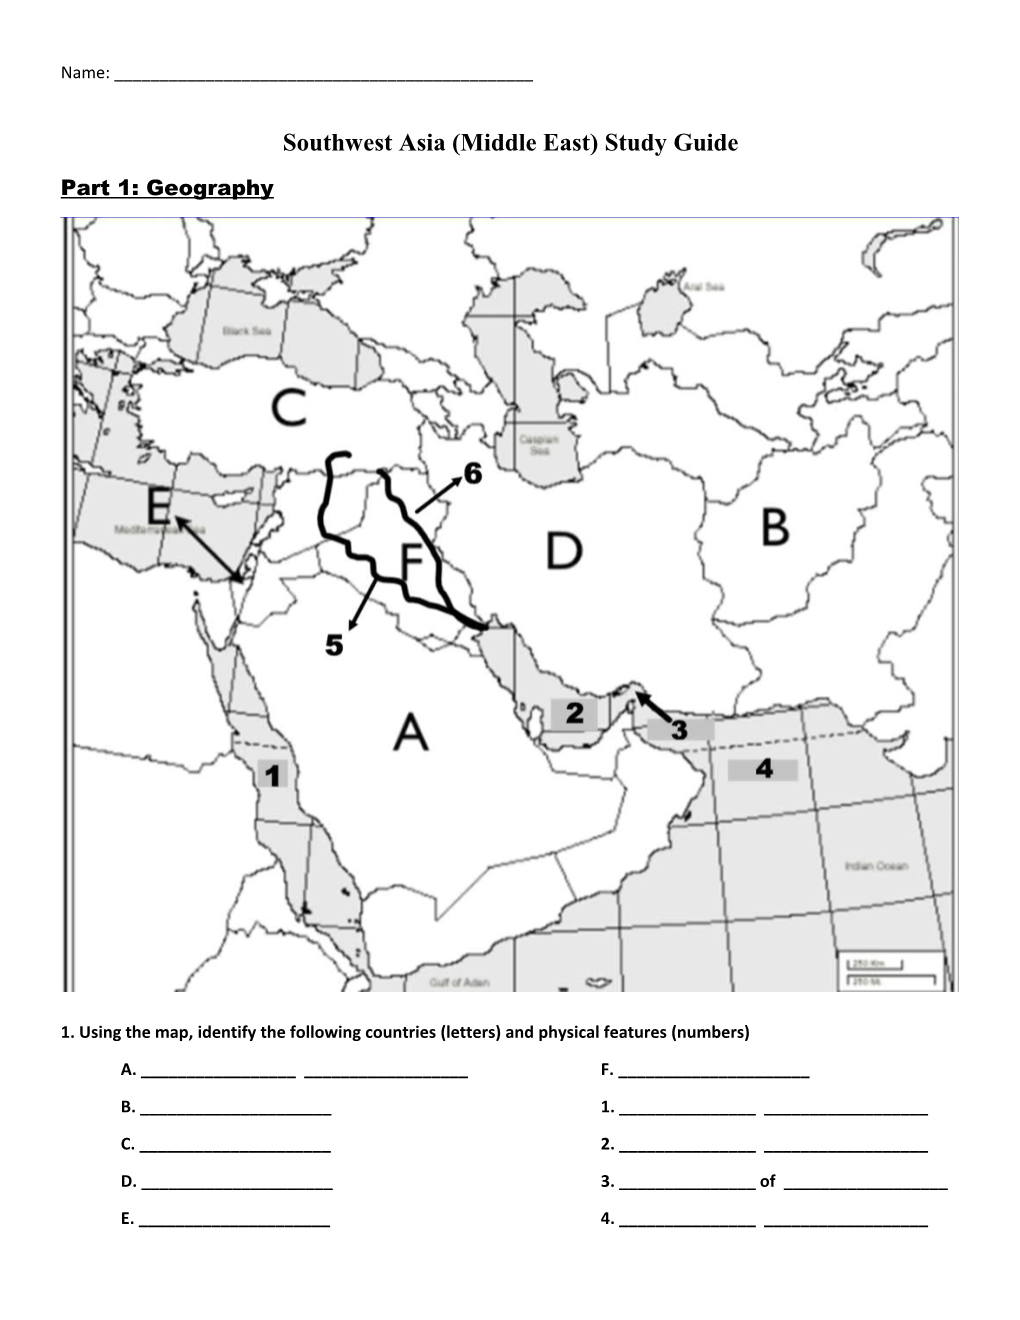 Southwest Asia (Middle East) Study Guide